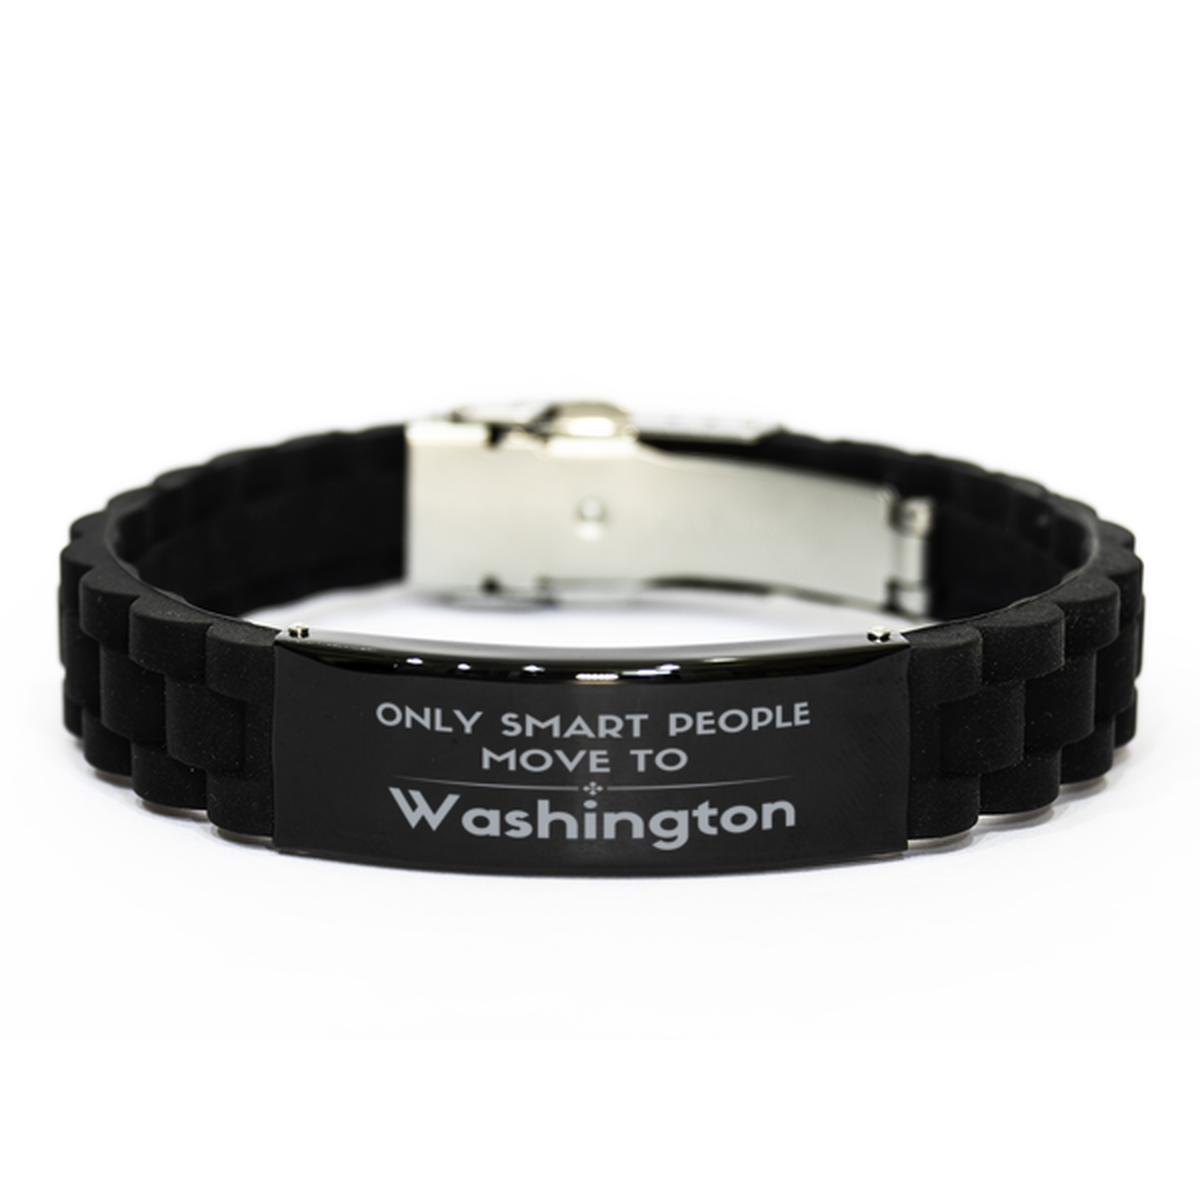 Only smart people move to Washington Black Glidelock Clasp Bracelet, Gag Gifts For Washington, Move to Washington Gifts for Friends Coworker Funny Saying Quote